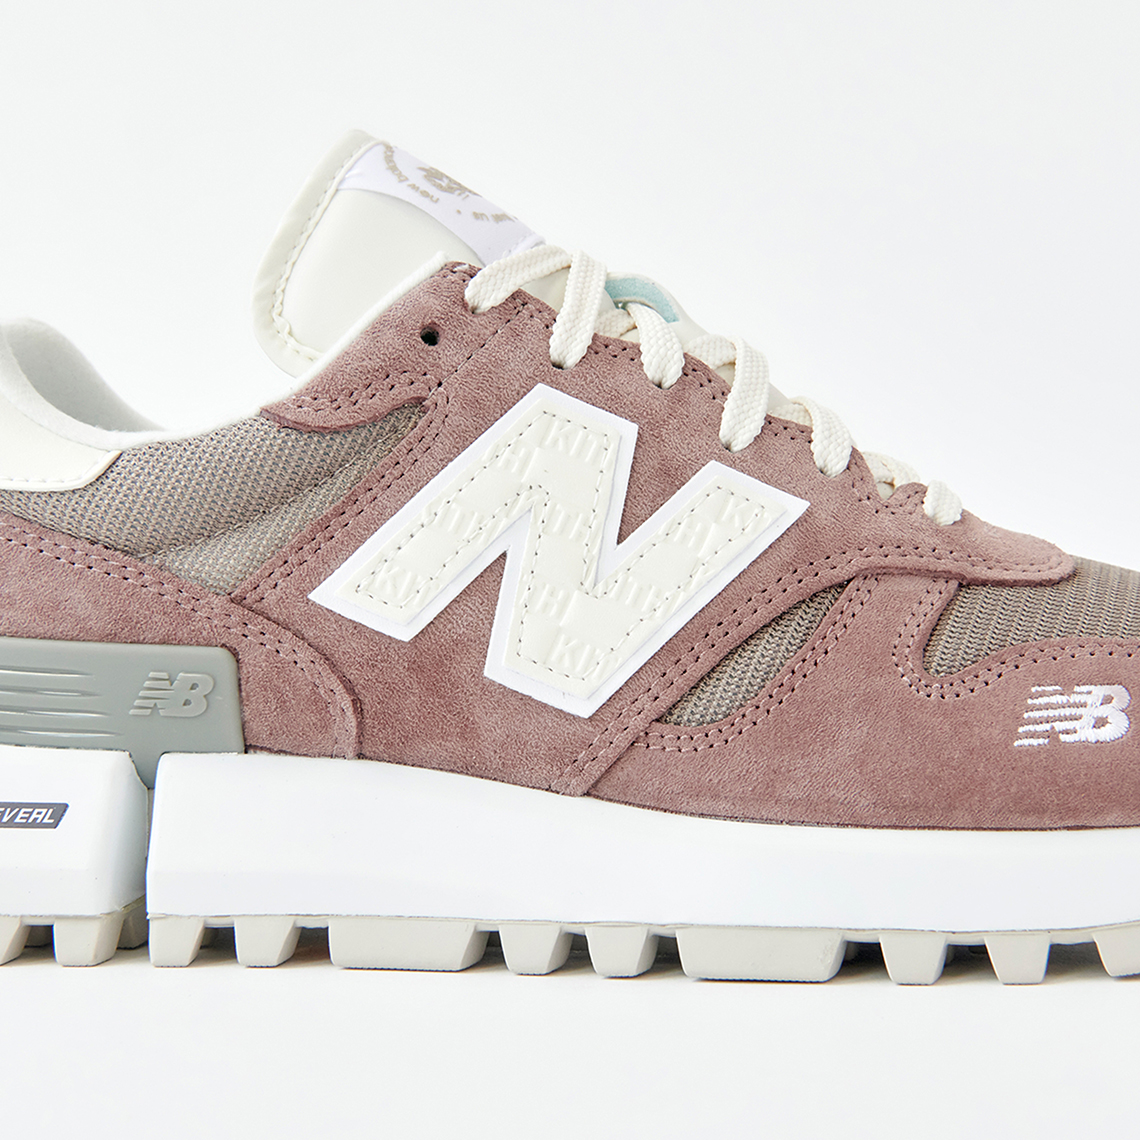 Kith New Balance Rc 1300 Collection Release Date 4